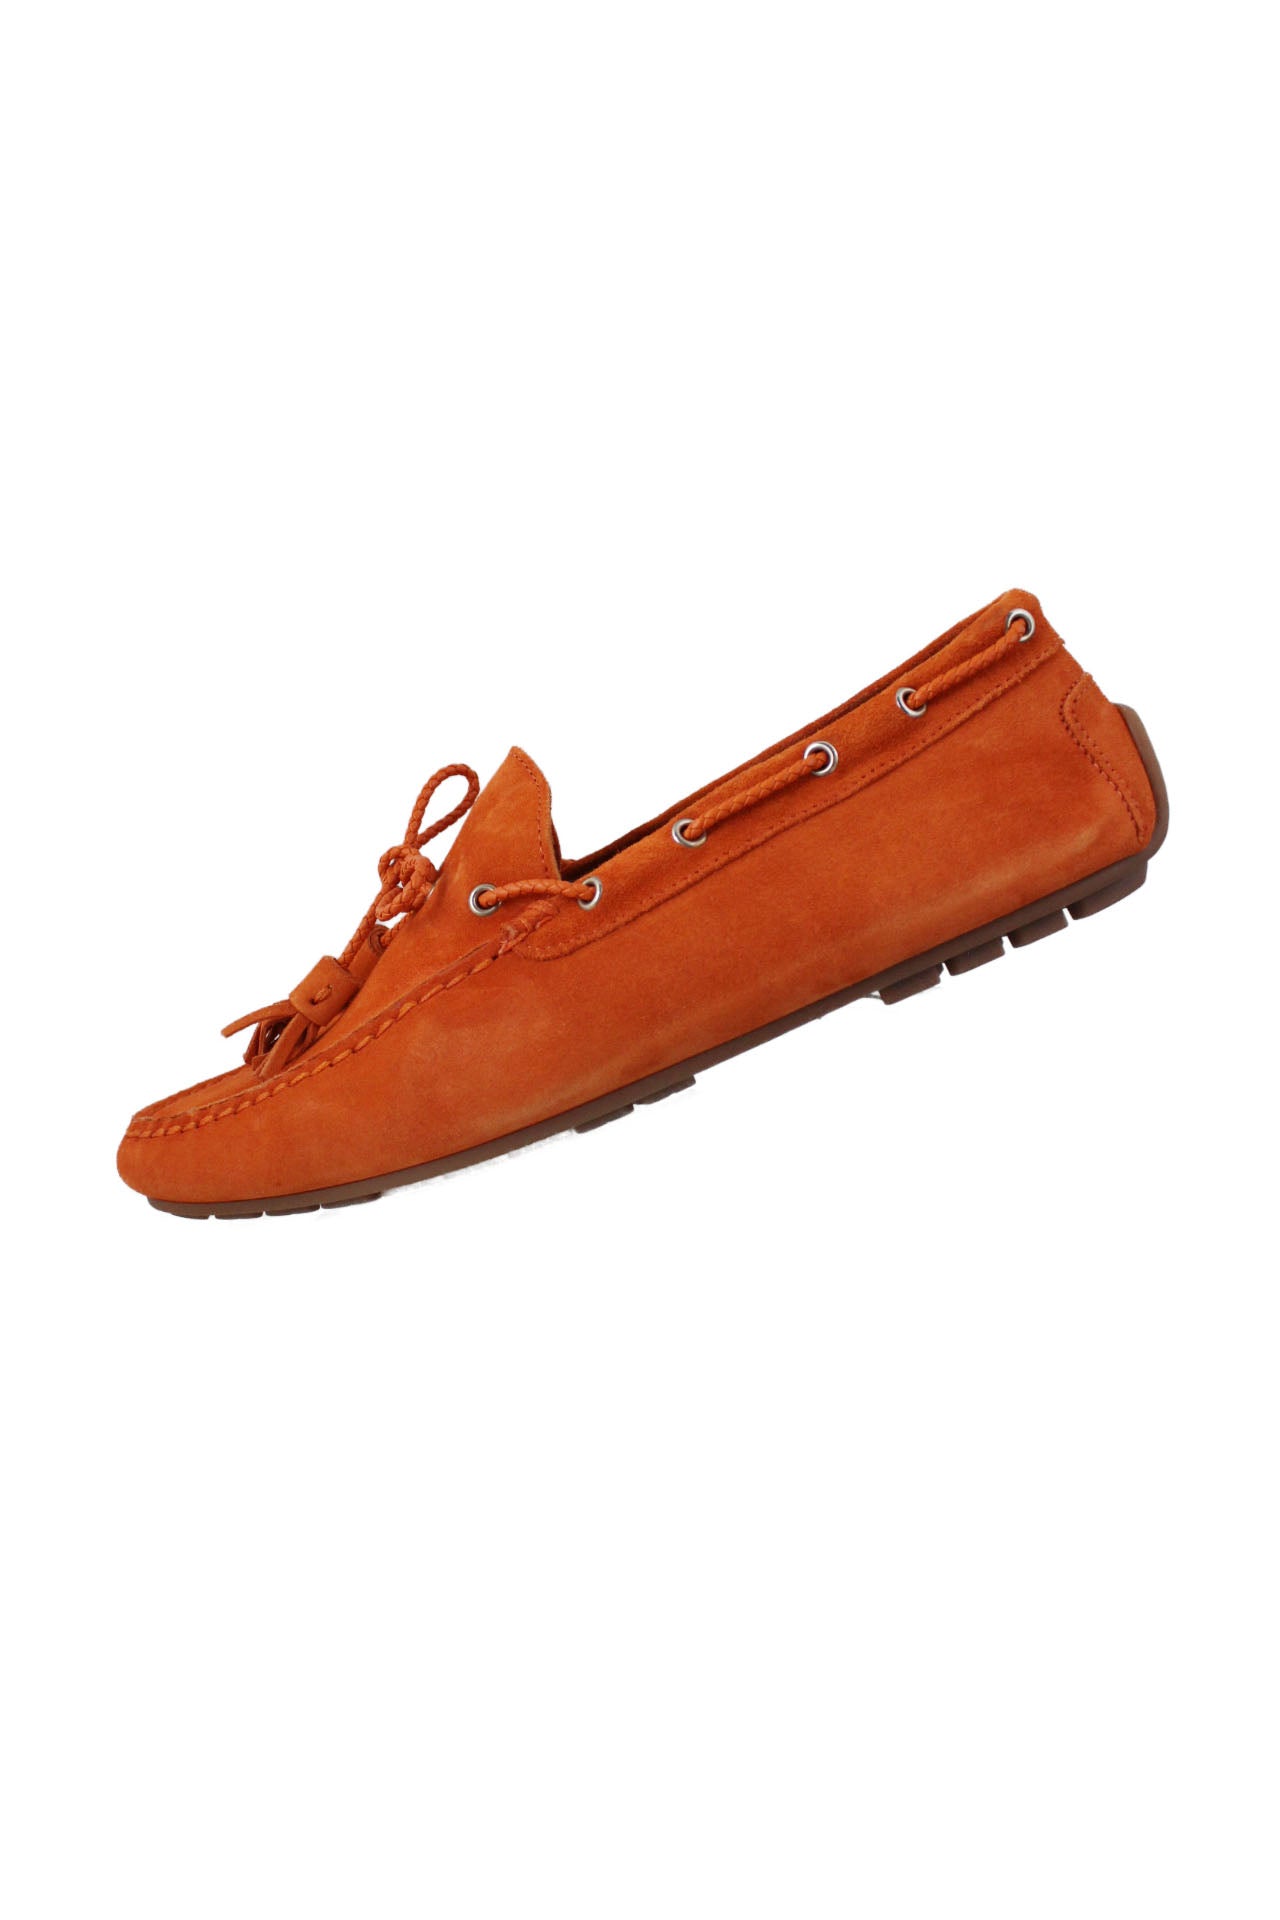 side view of ralph lauren orange suede loafers. features braided lace closure with tassels with rubber sole.